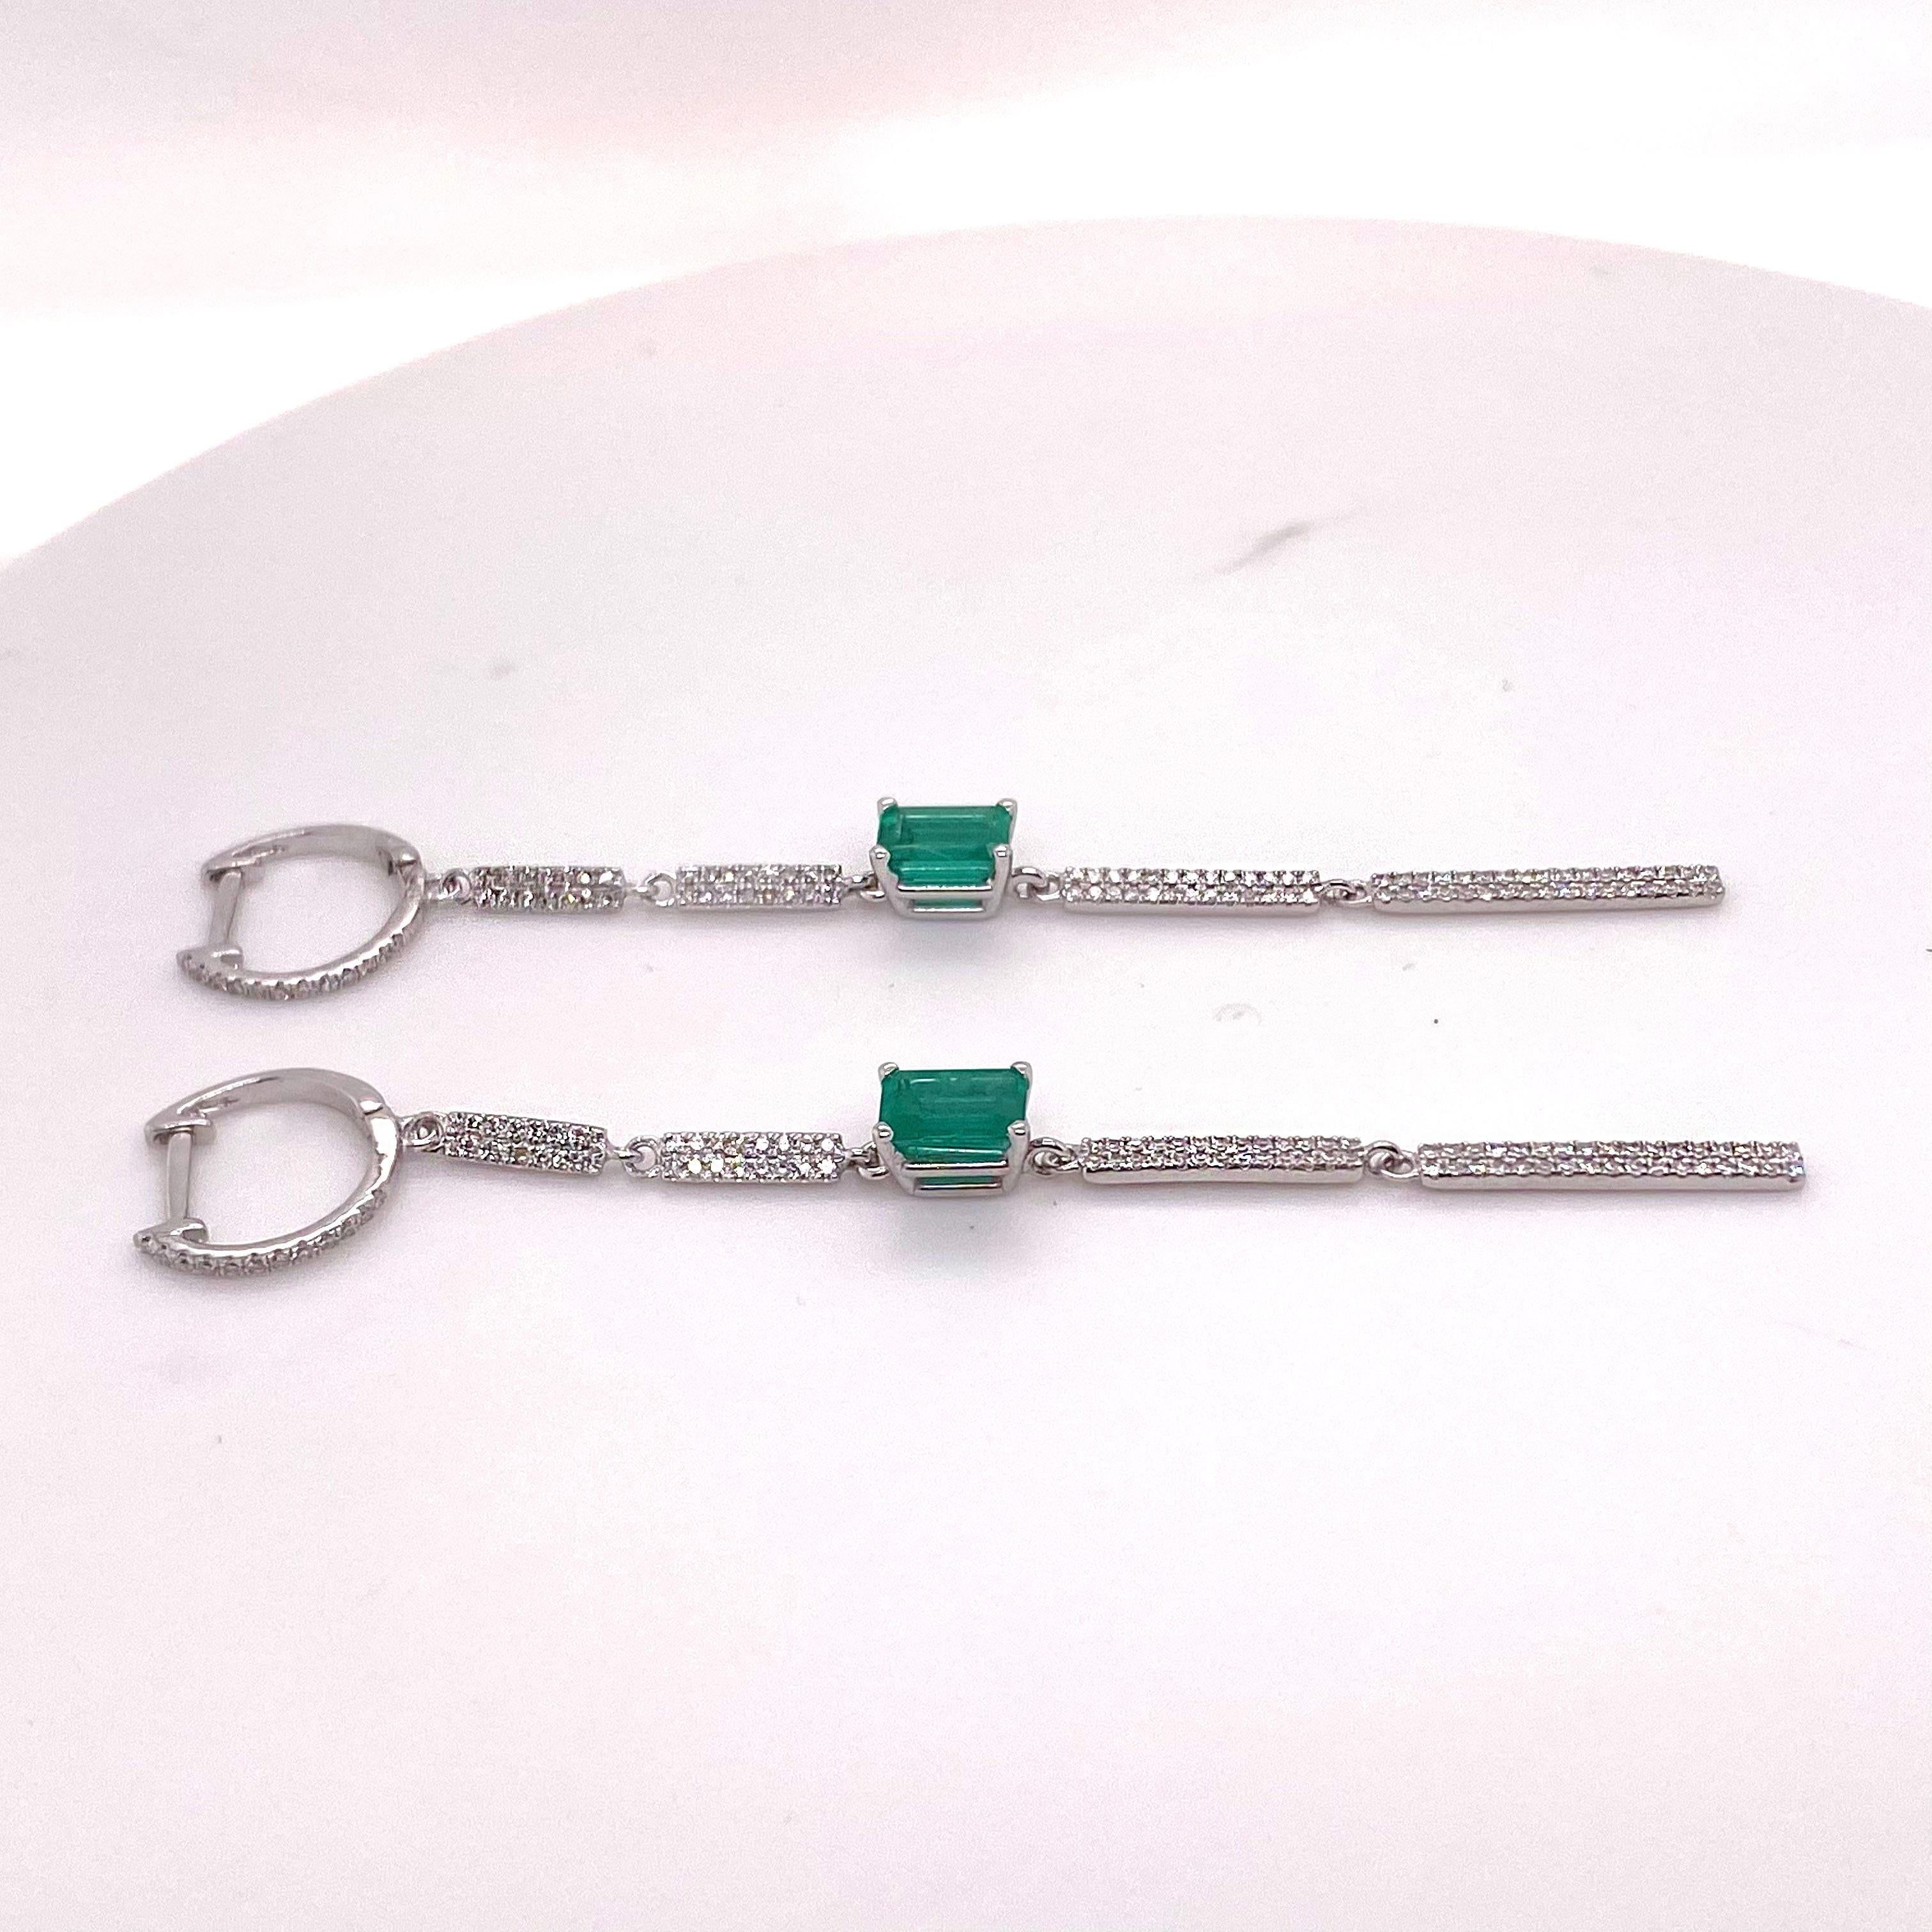 These earrings are made to order and can be custom made in white gold, yellow gold, rose gold and with emeralds or sapphires.  The earrings are perfect for a wedding and take 3 to 5 weeks for our jewelers to make them up. The details for this